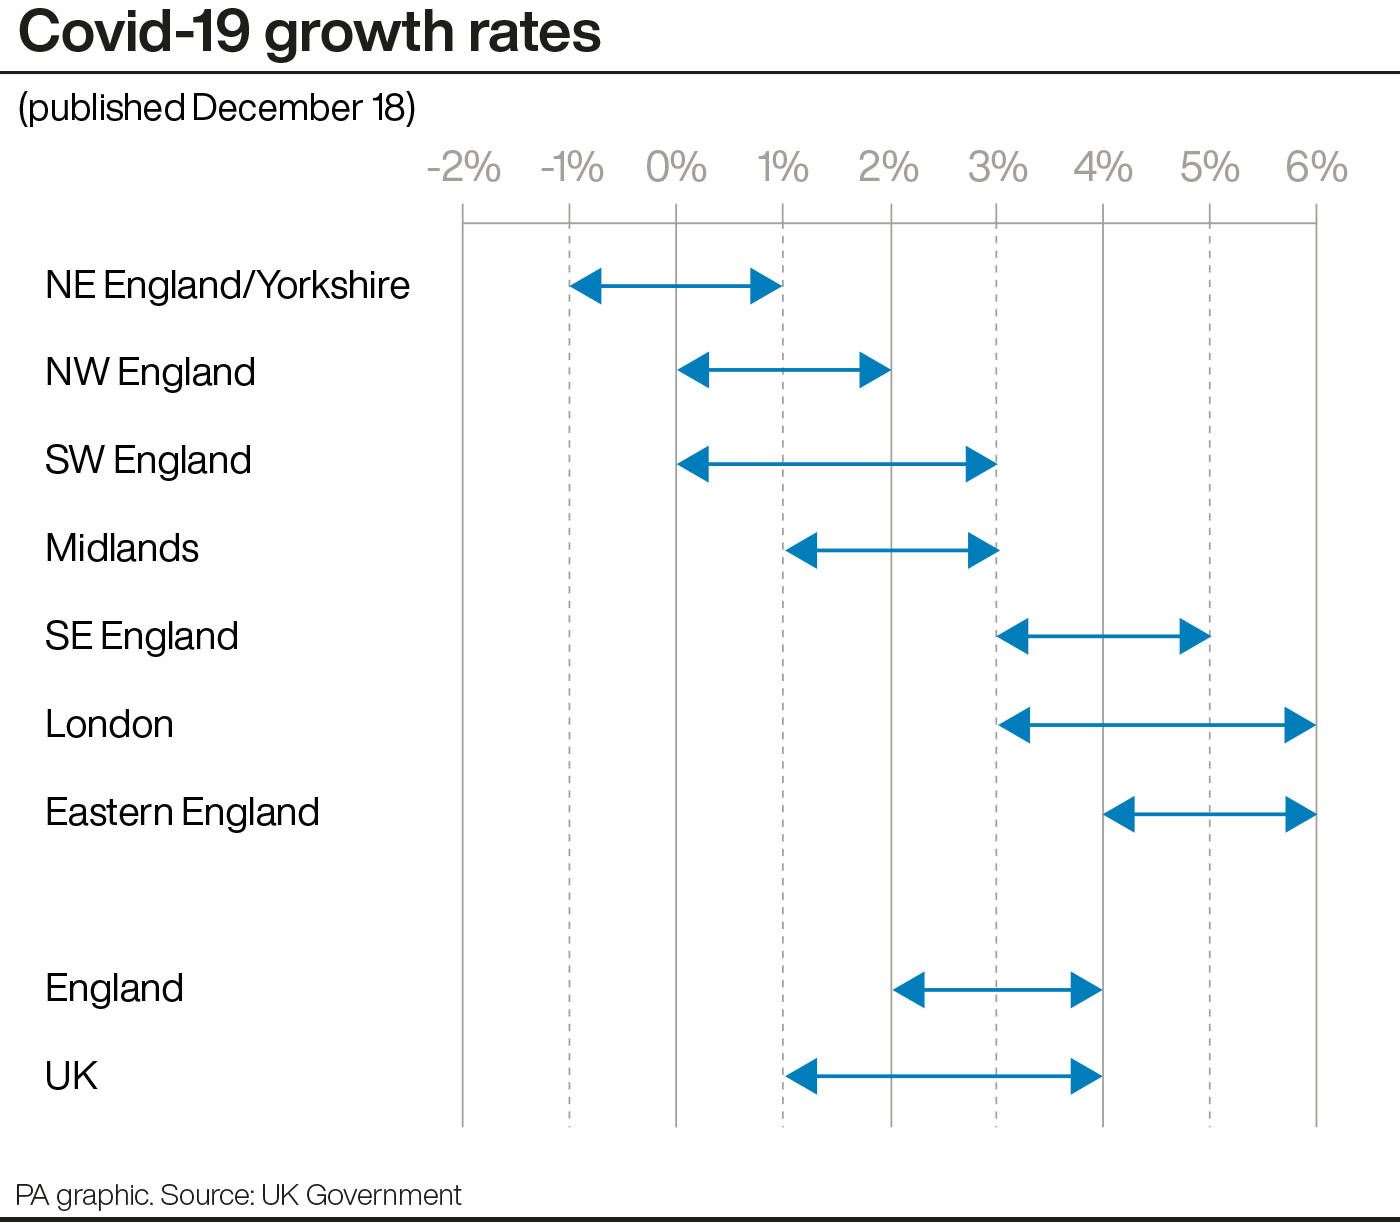 Covid-19 growth rates (PA Graphics)